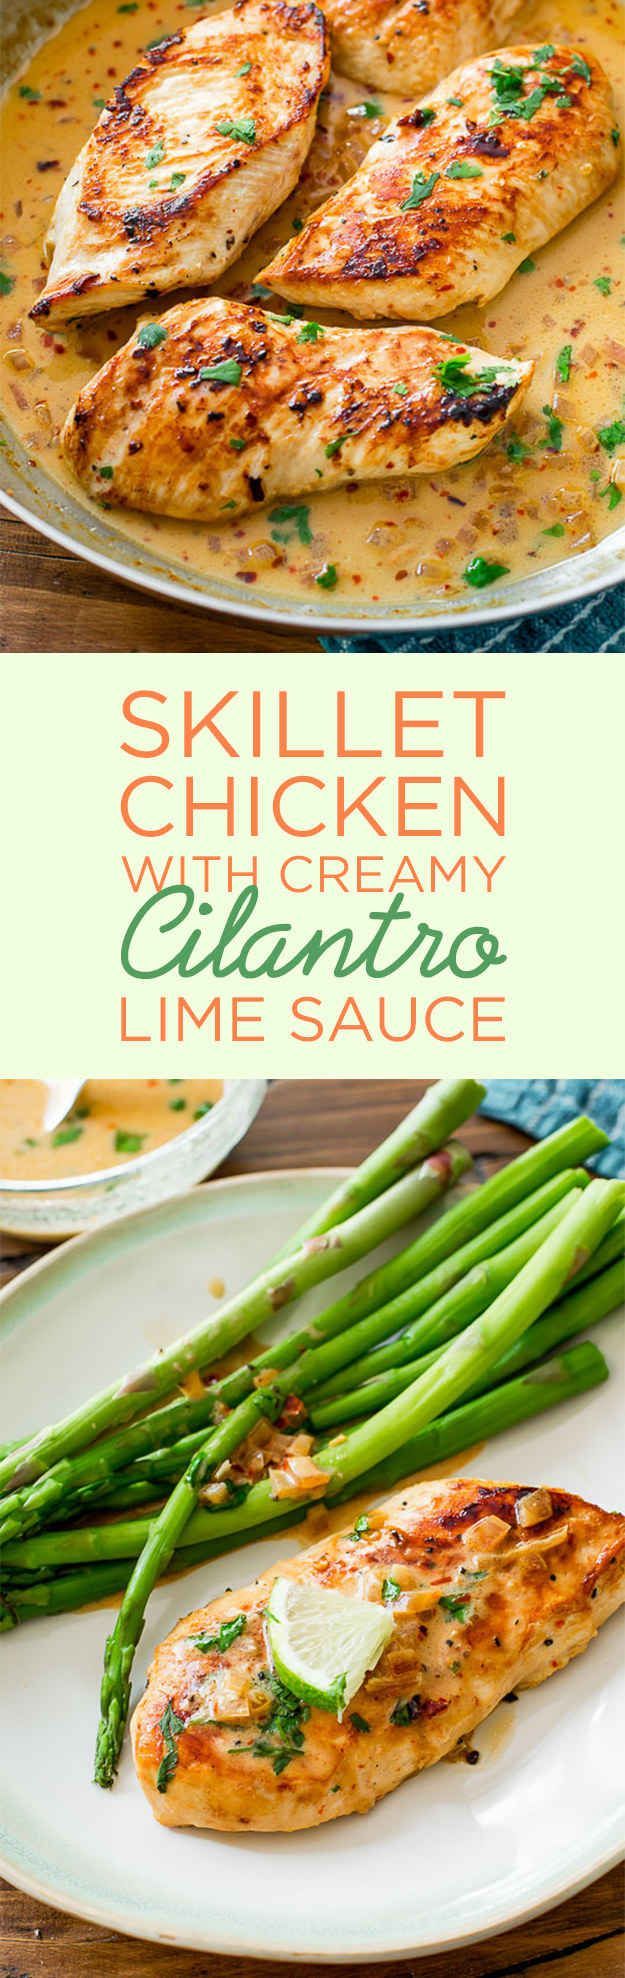 Skillet Chicken with Creamy Cilantro Lime Sauce and 6 other yummy dinners for a busy week